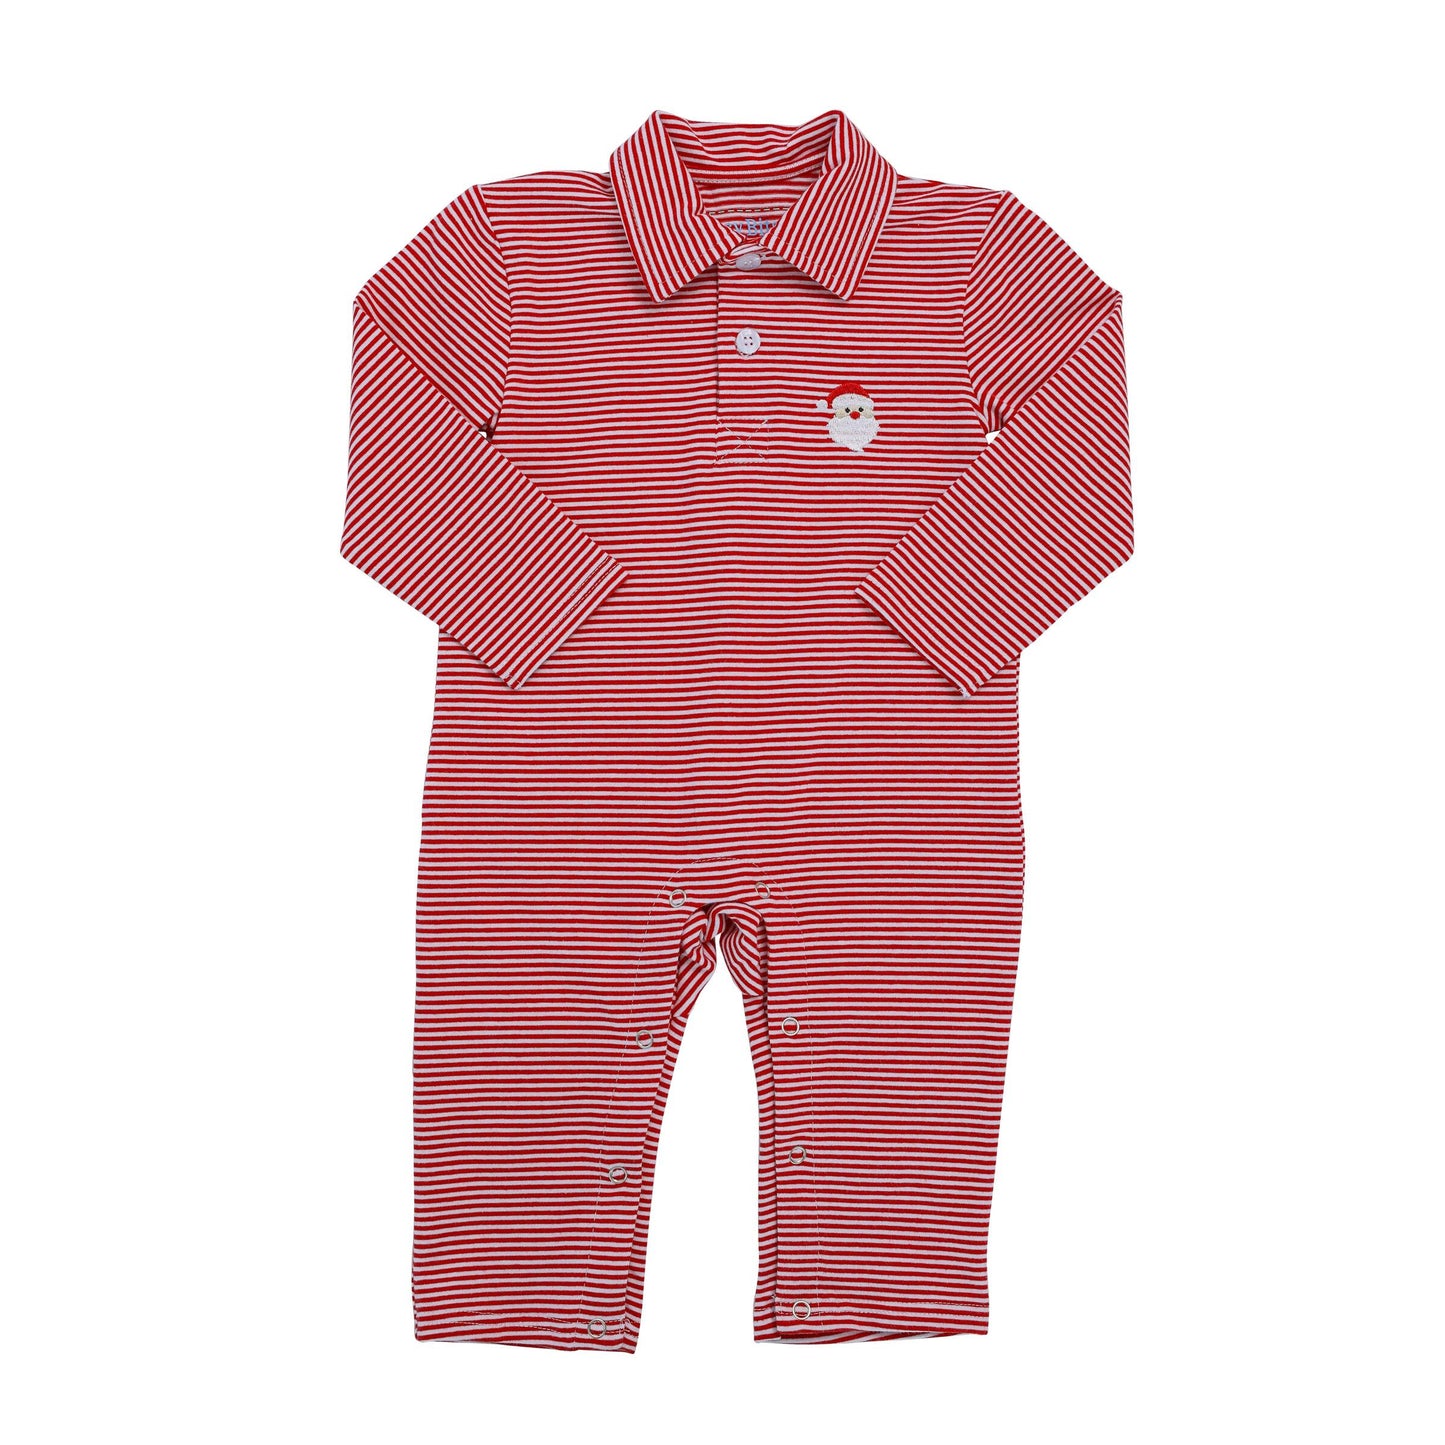 A baby boy's Chickie Collective Santa Polo Romper with red and white stripes.